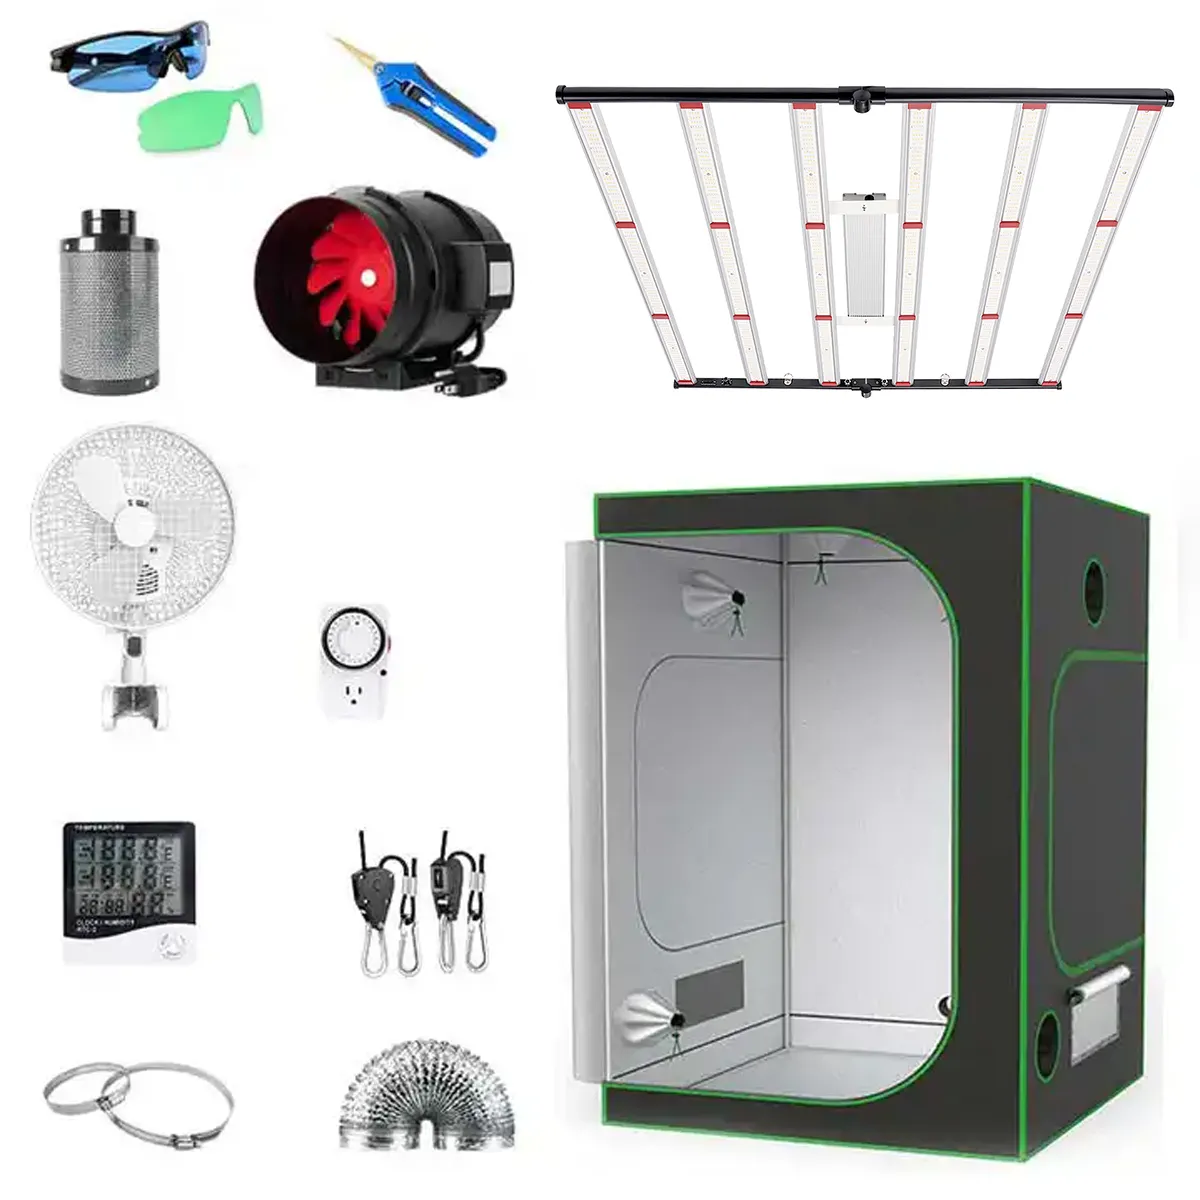 Wholesale Sales Greenhouse Hydroponics System Inline Fan Wifi And Carbon Filter 120x120x200cm Grow Tent 600W Led Grow Light Kit